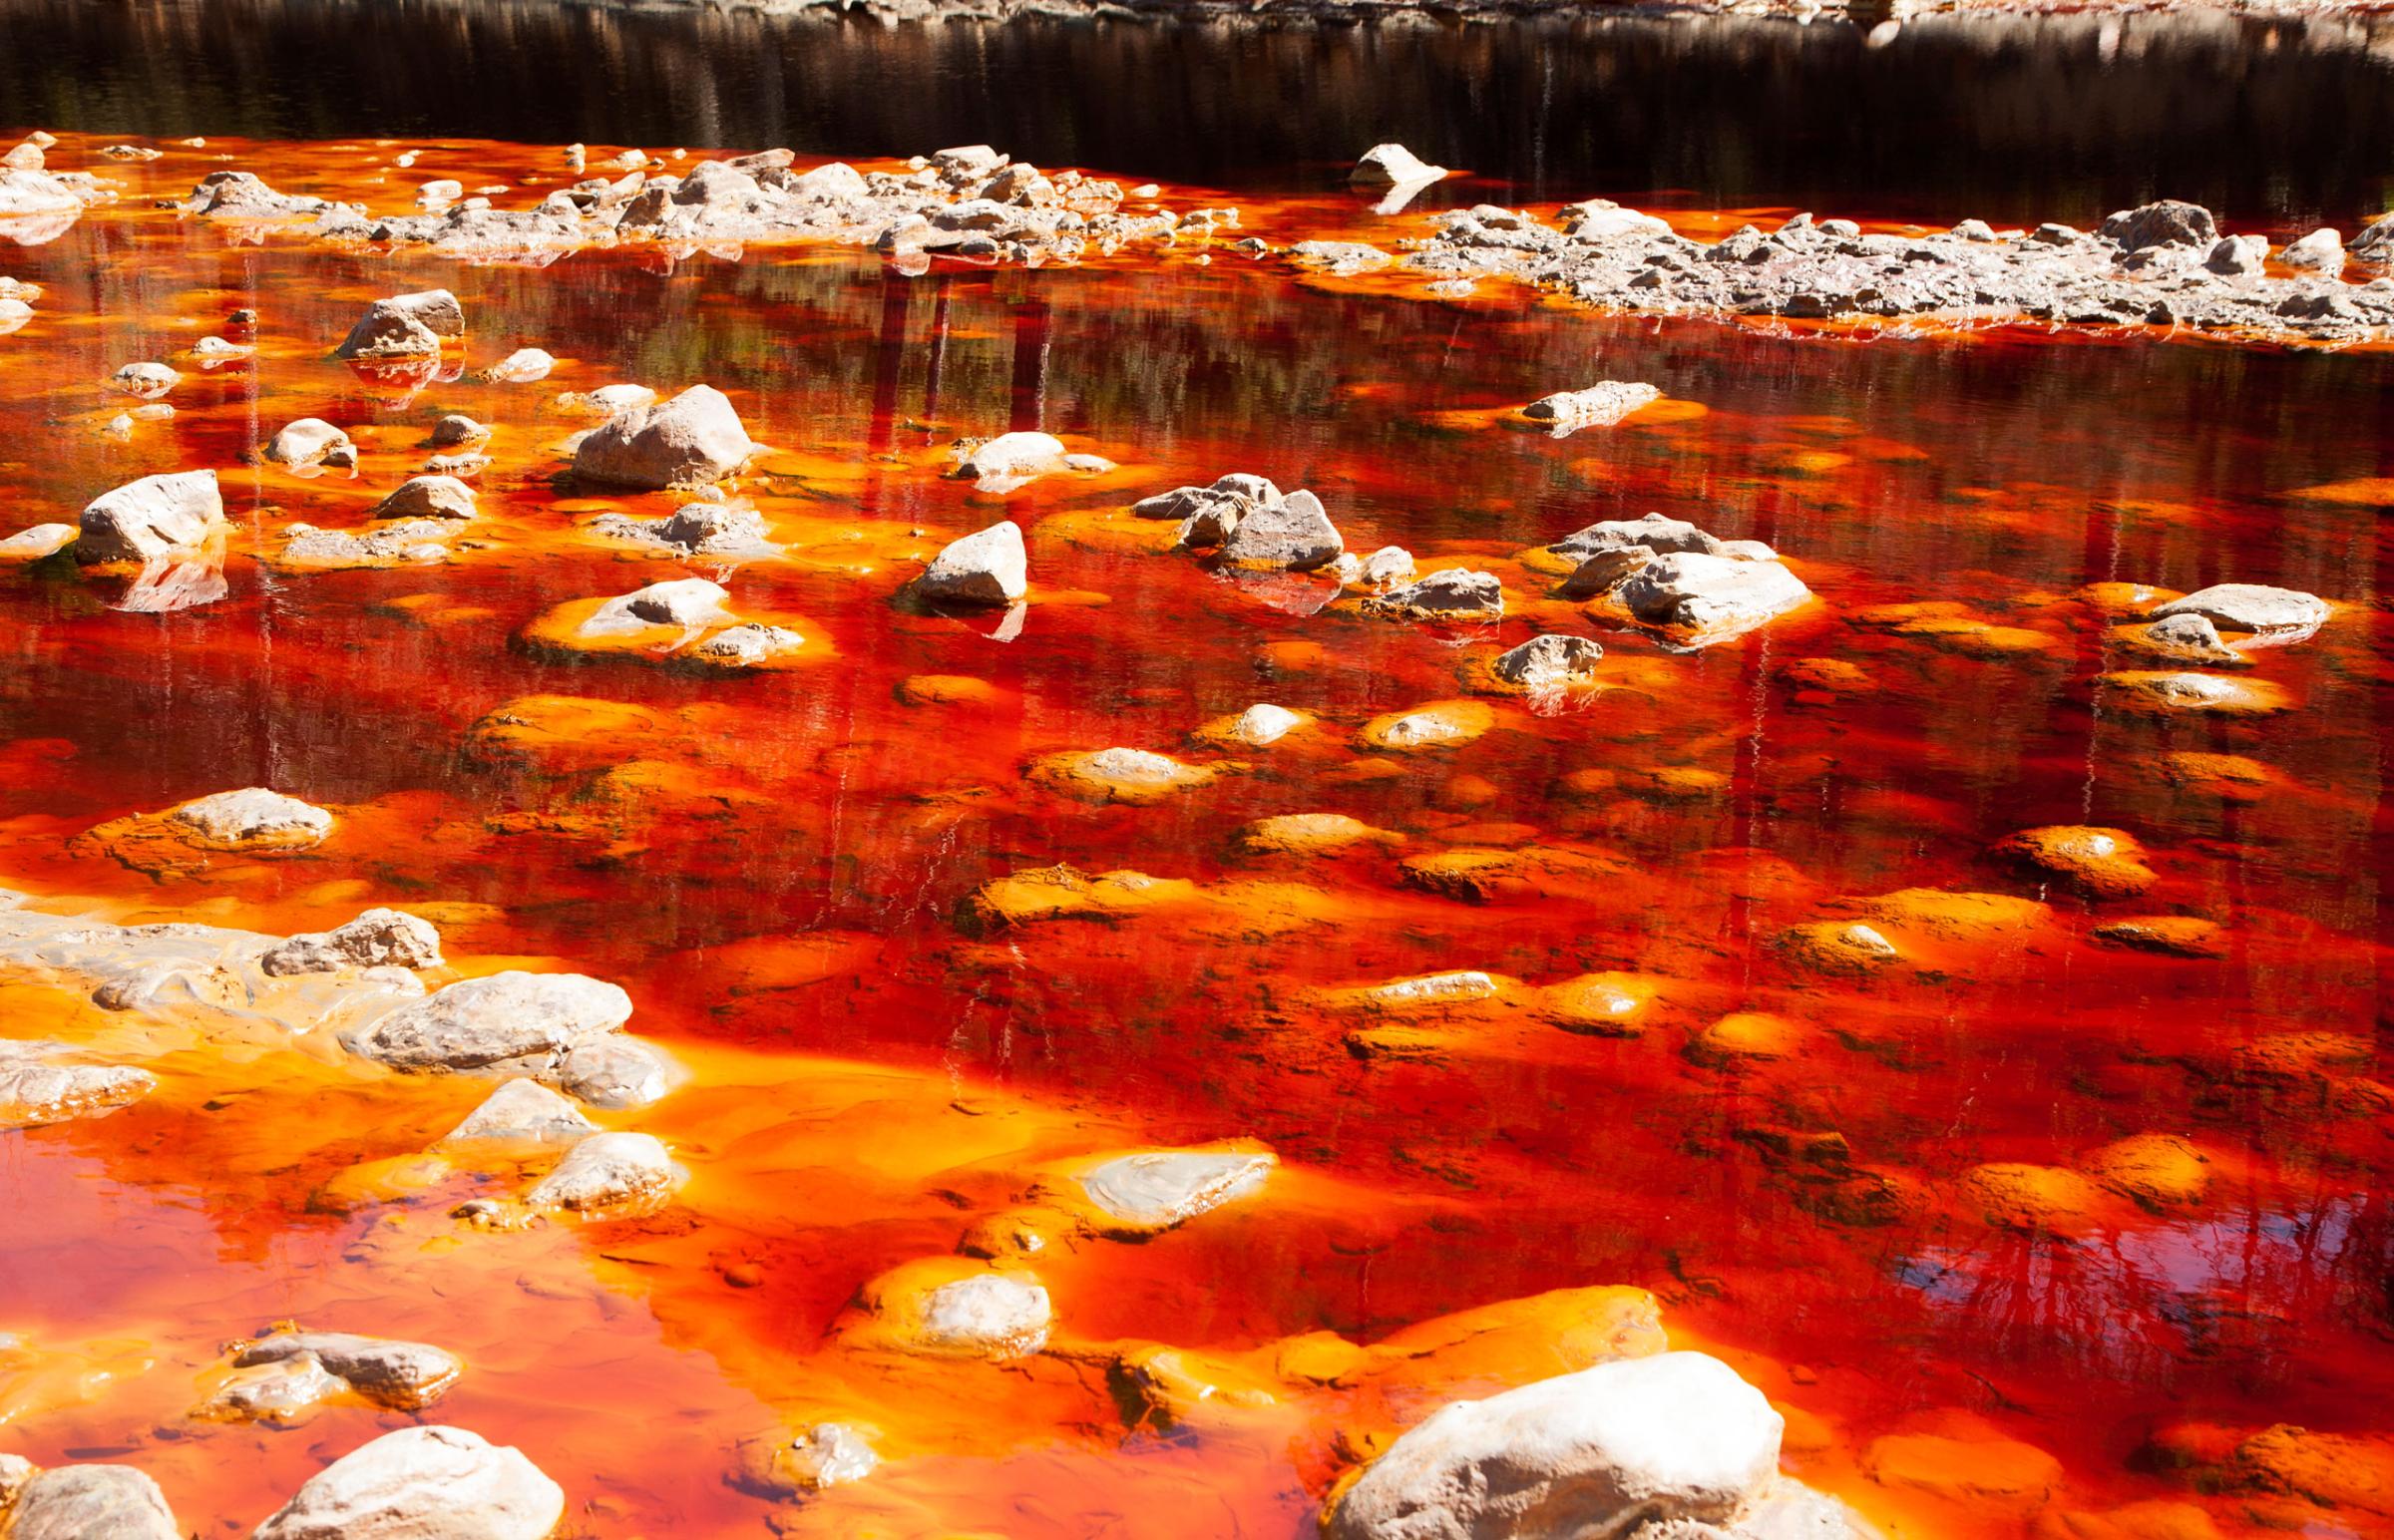 Blood red mineral laden water in the Rio Tinto river in the Minas de Riotinto mining area, Huelva province